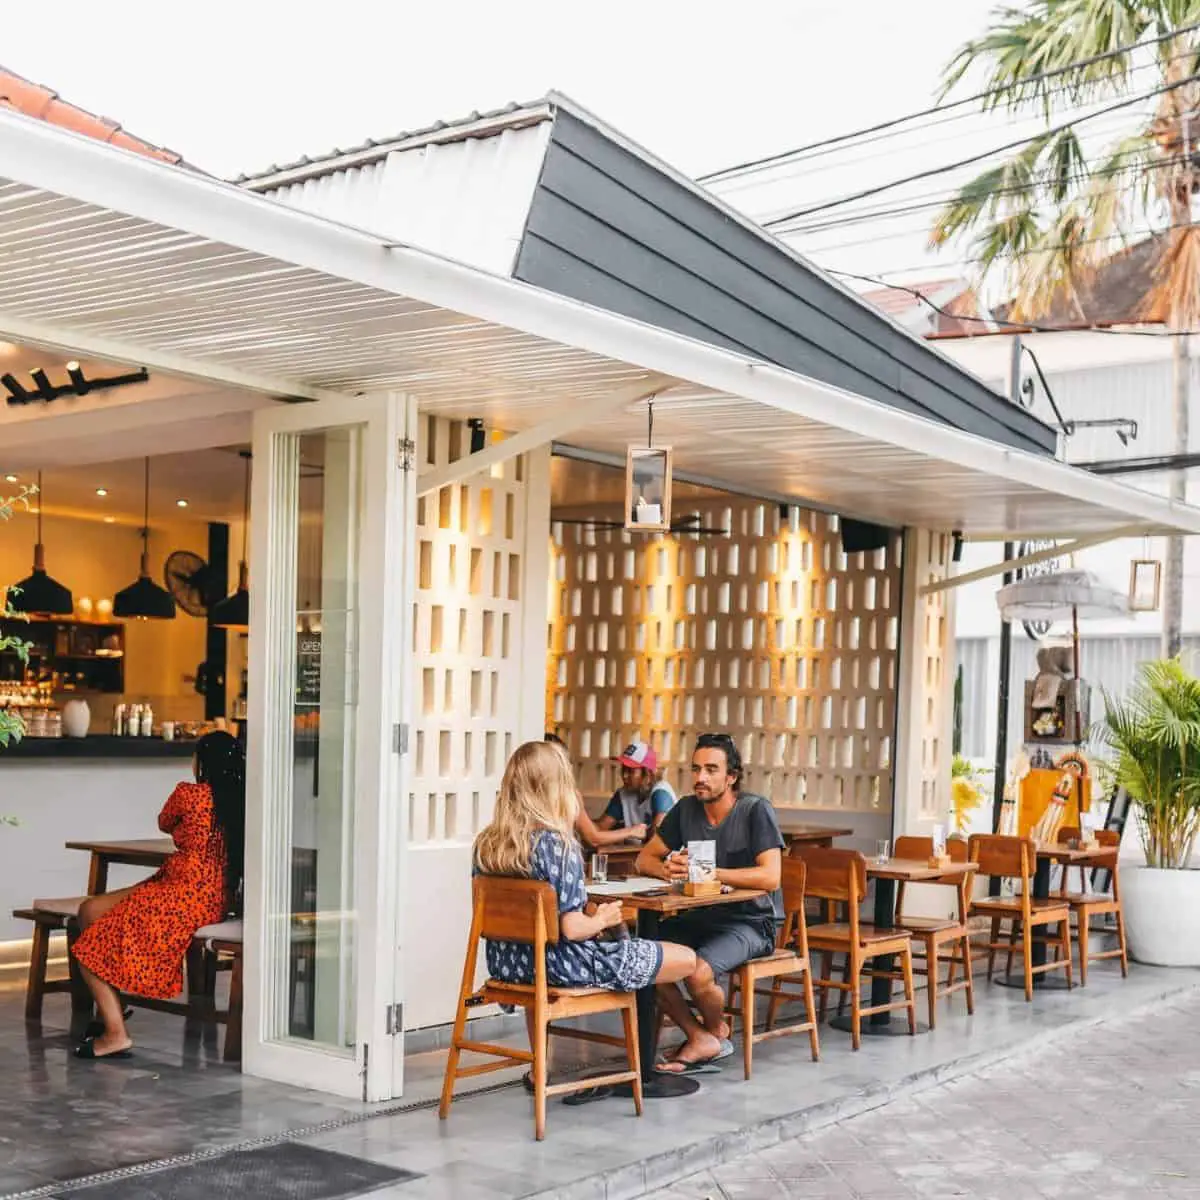 Best cafes in Bali Watercress Cafe 